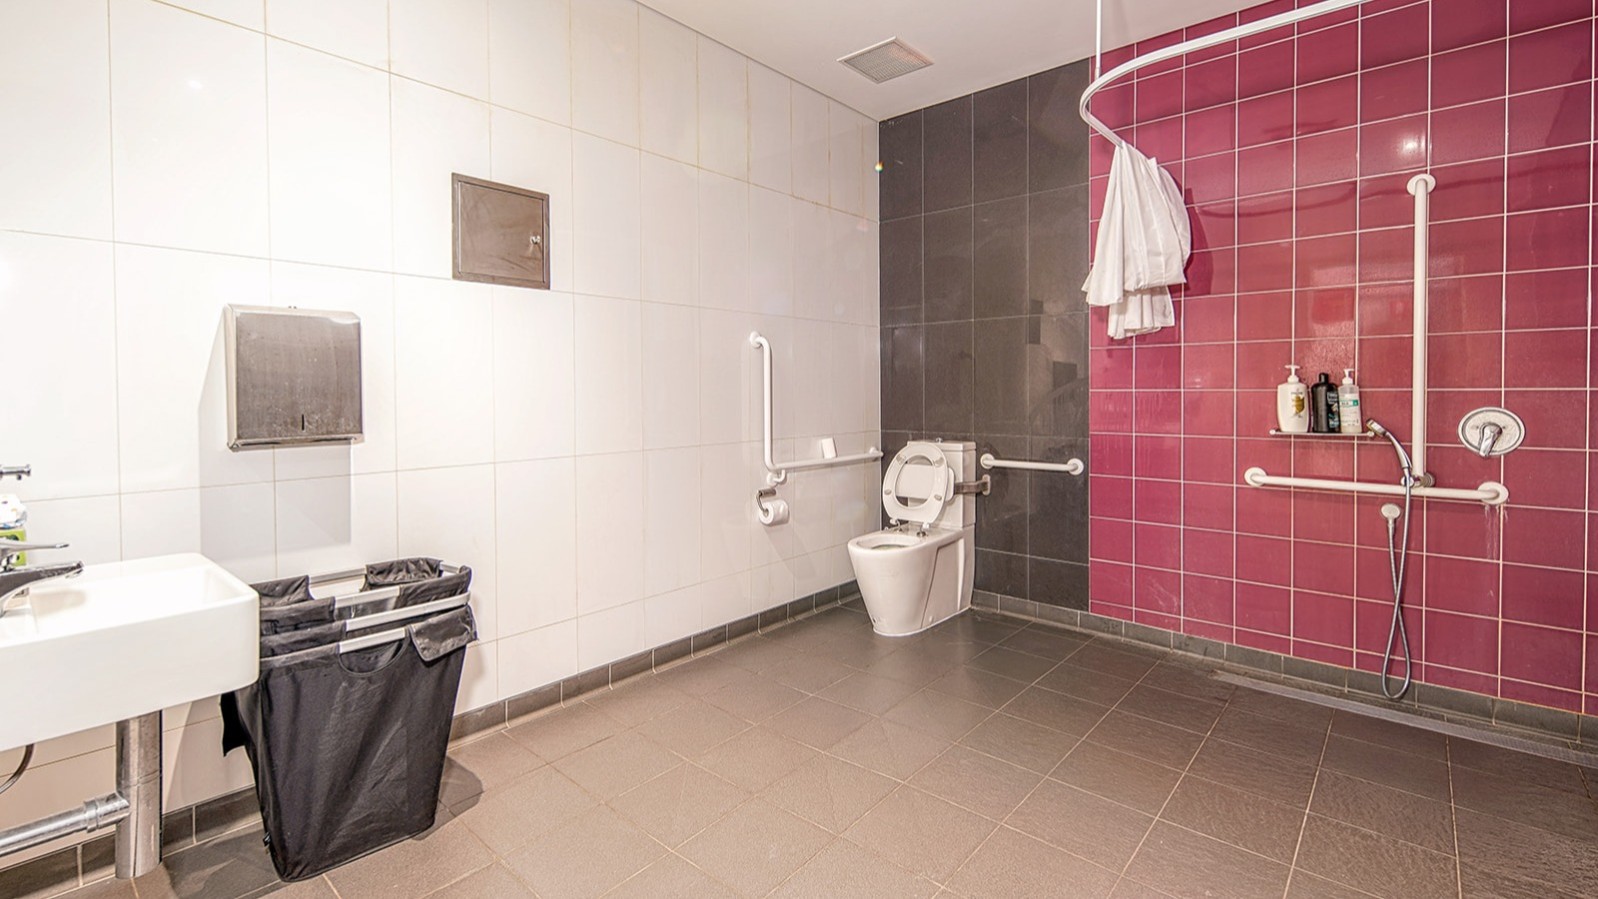 --Fully accessible bathroom with shower, tiles and basin.--